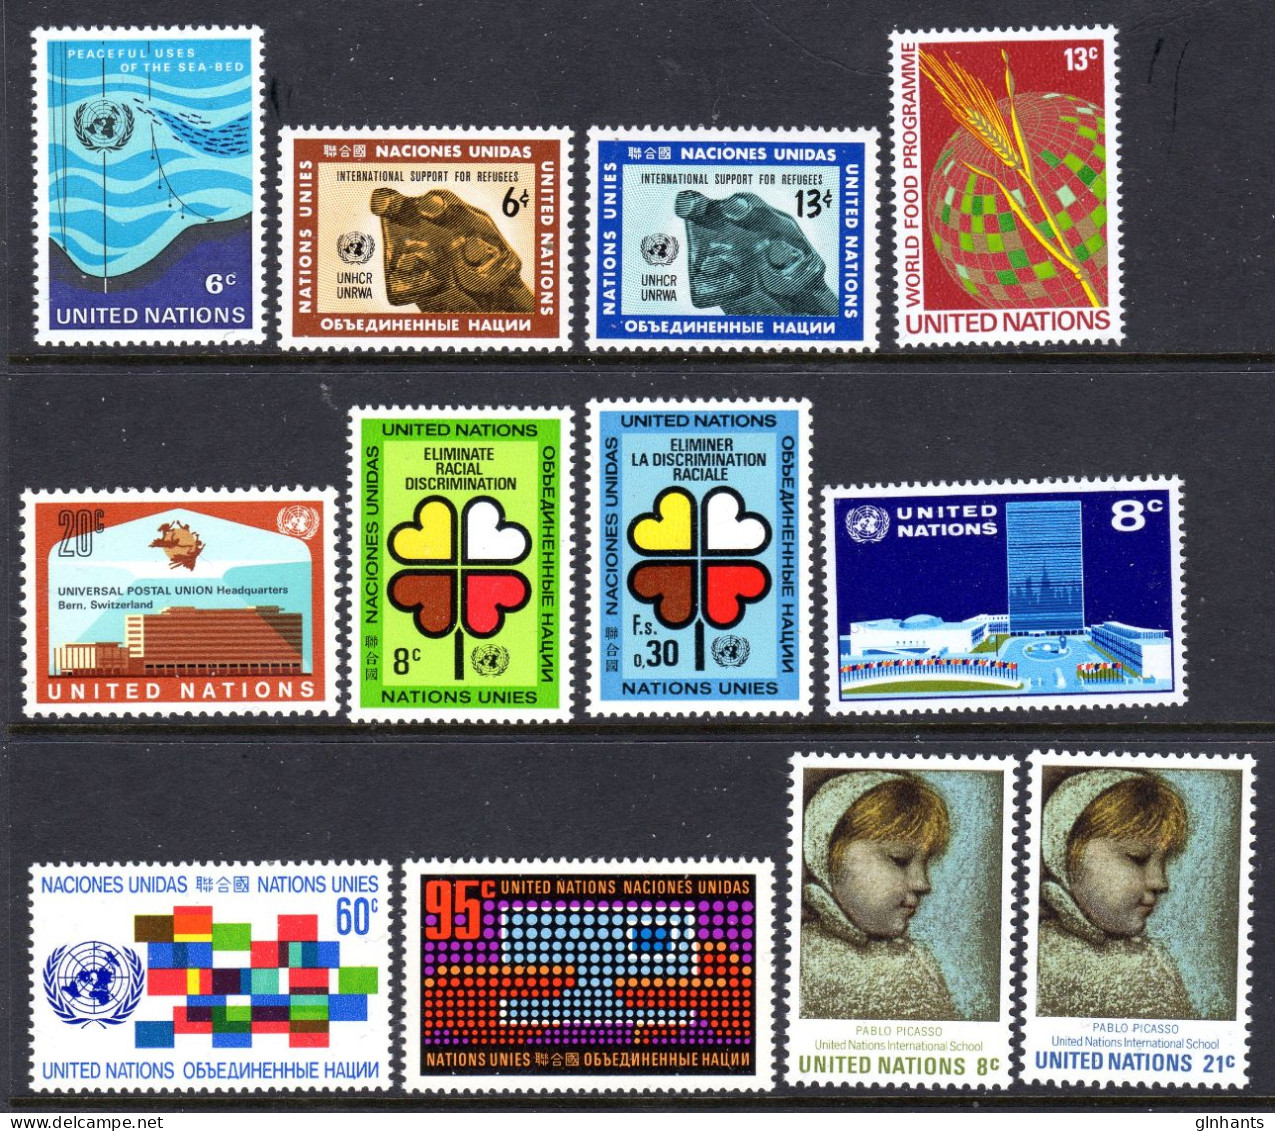 UNITED NATIONS UN NEW YORK - 1971 COMPLETE YEAR SET (12V) AS PICTURED FINE MNH ** SG 215-226 - Nuevos